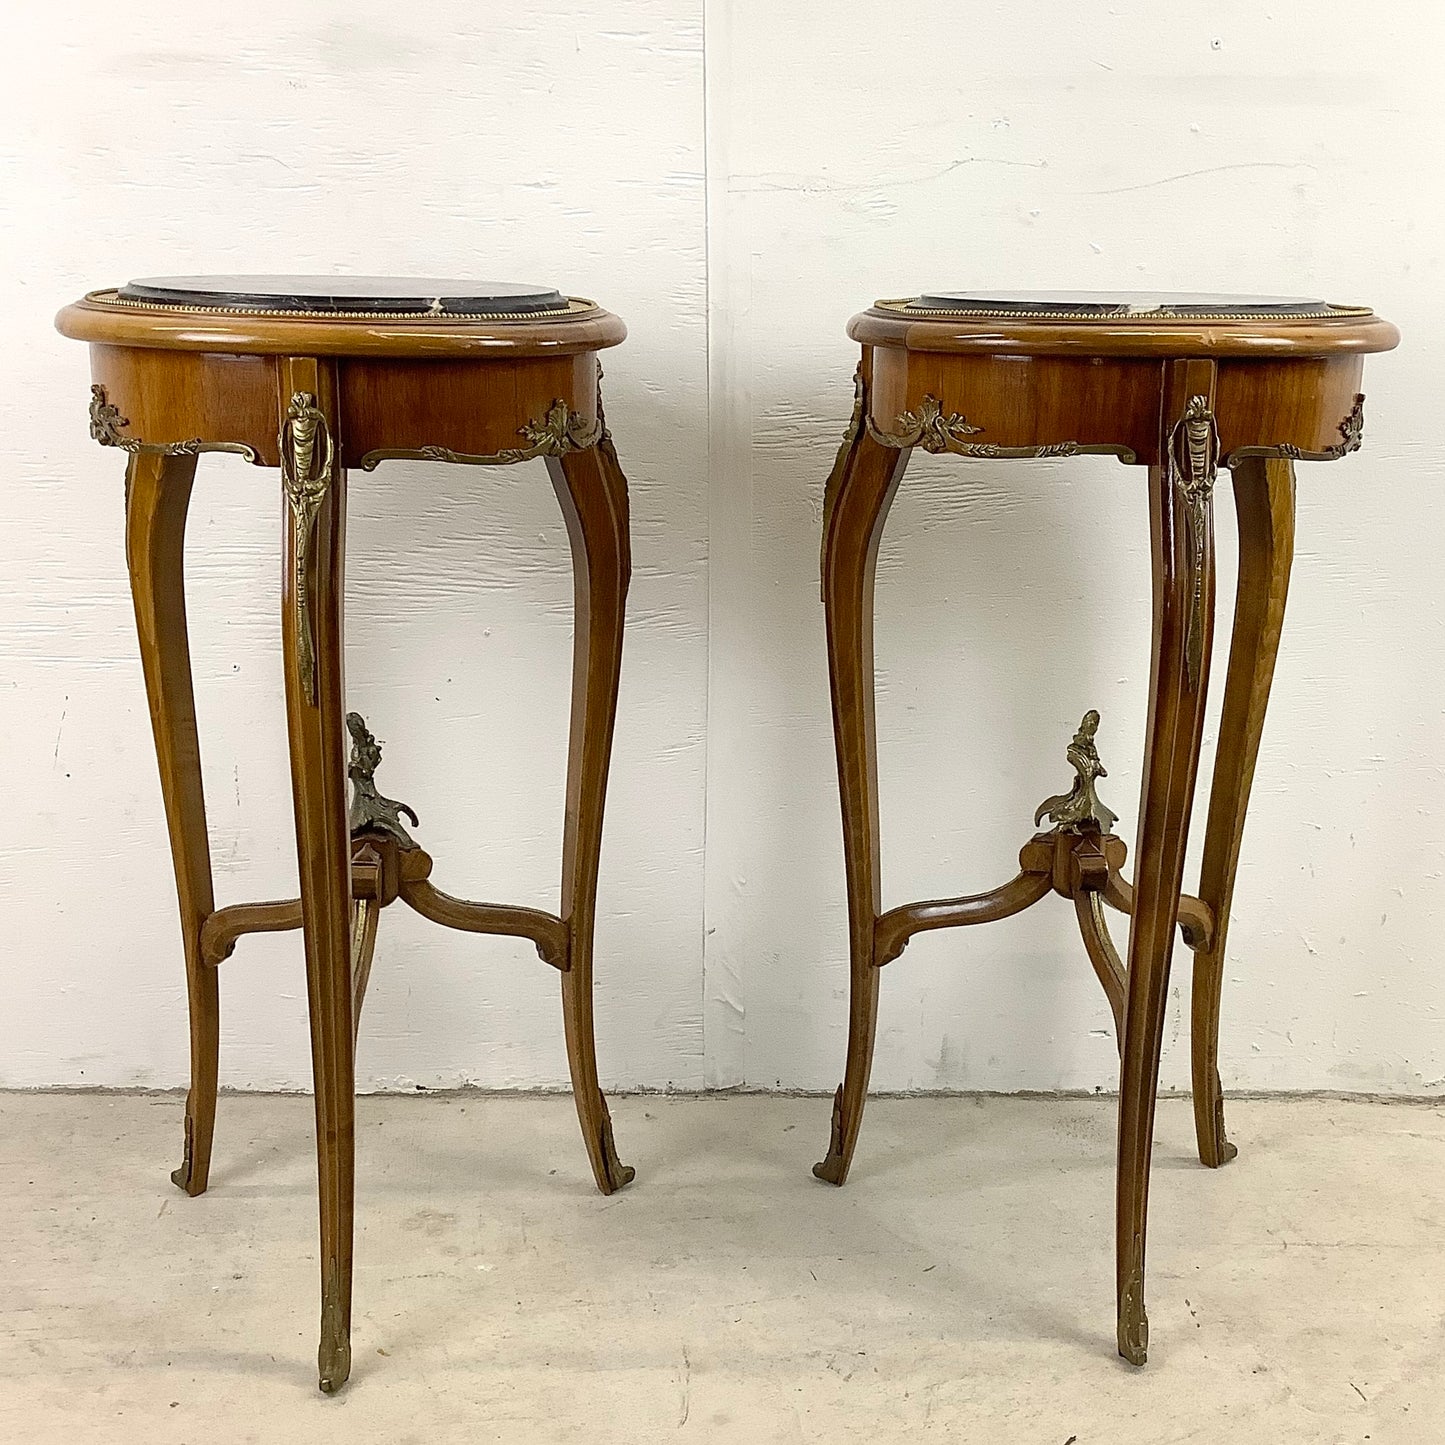 Pair of Vintage Louis XV Style Stone Top Side Tables with Ornate Detail